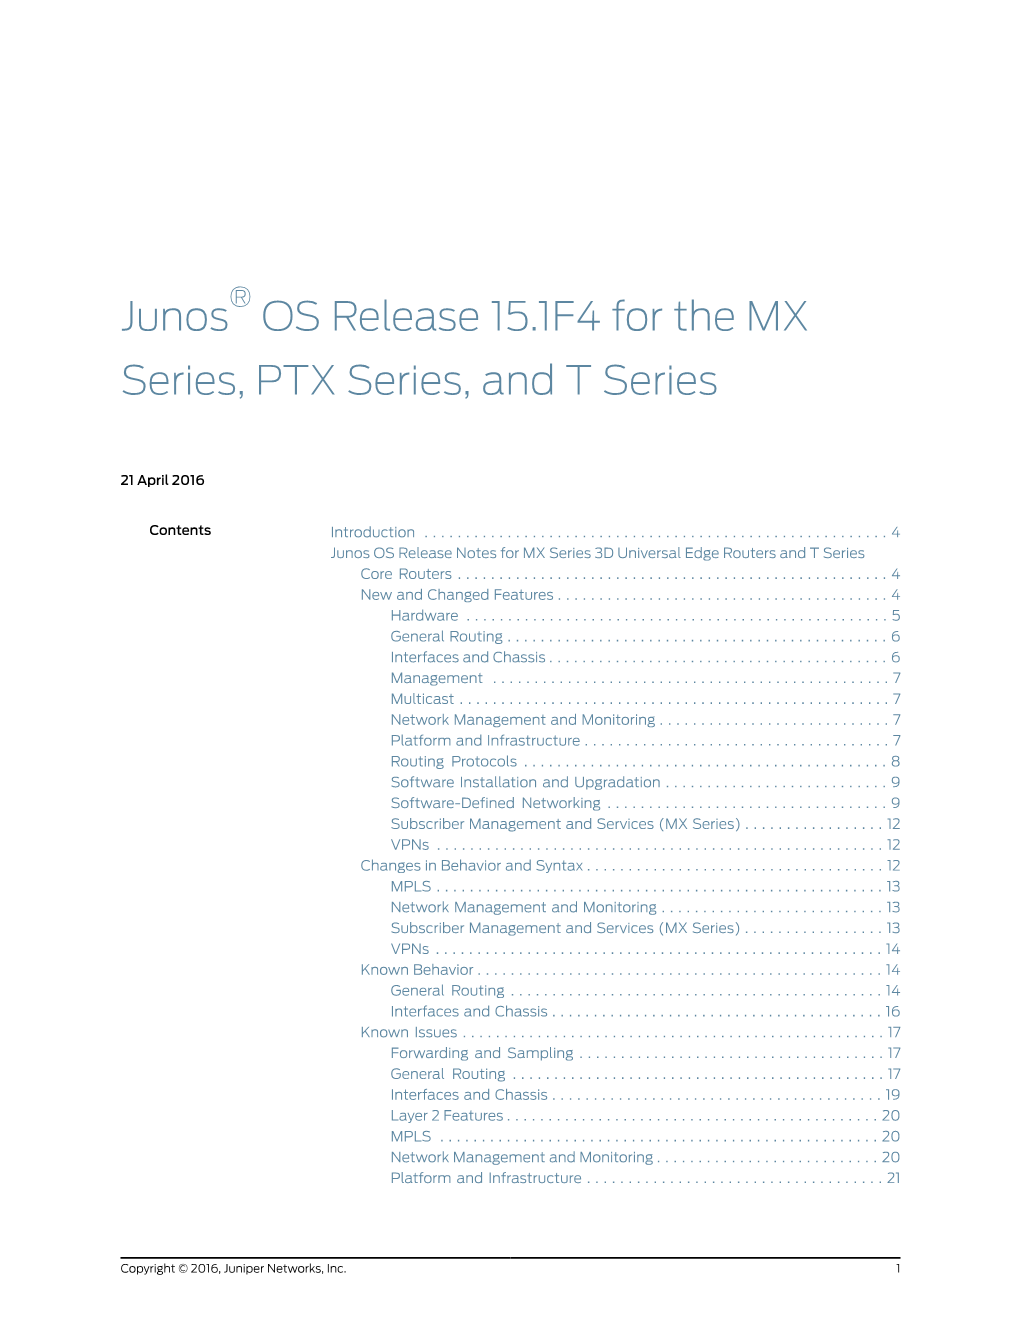 Junos® OS Release 15.1F4 for the MX Series, PTX Series, and T